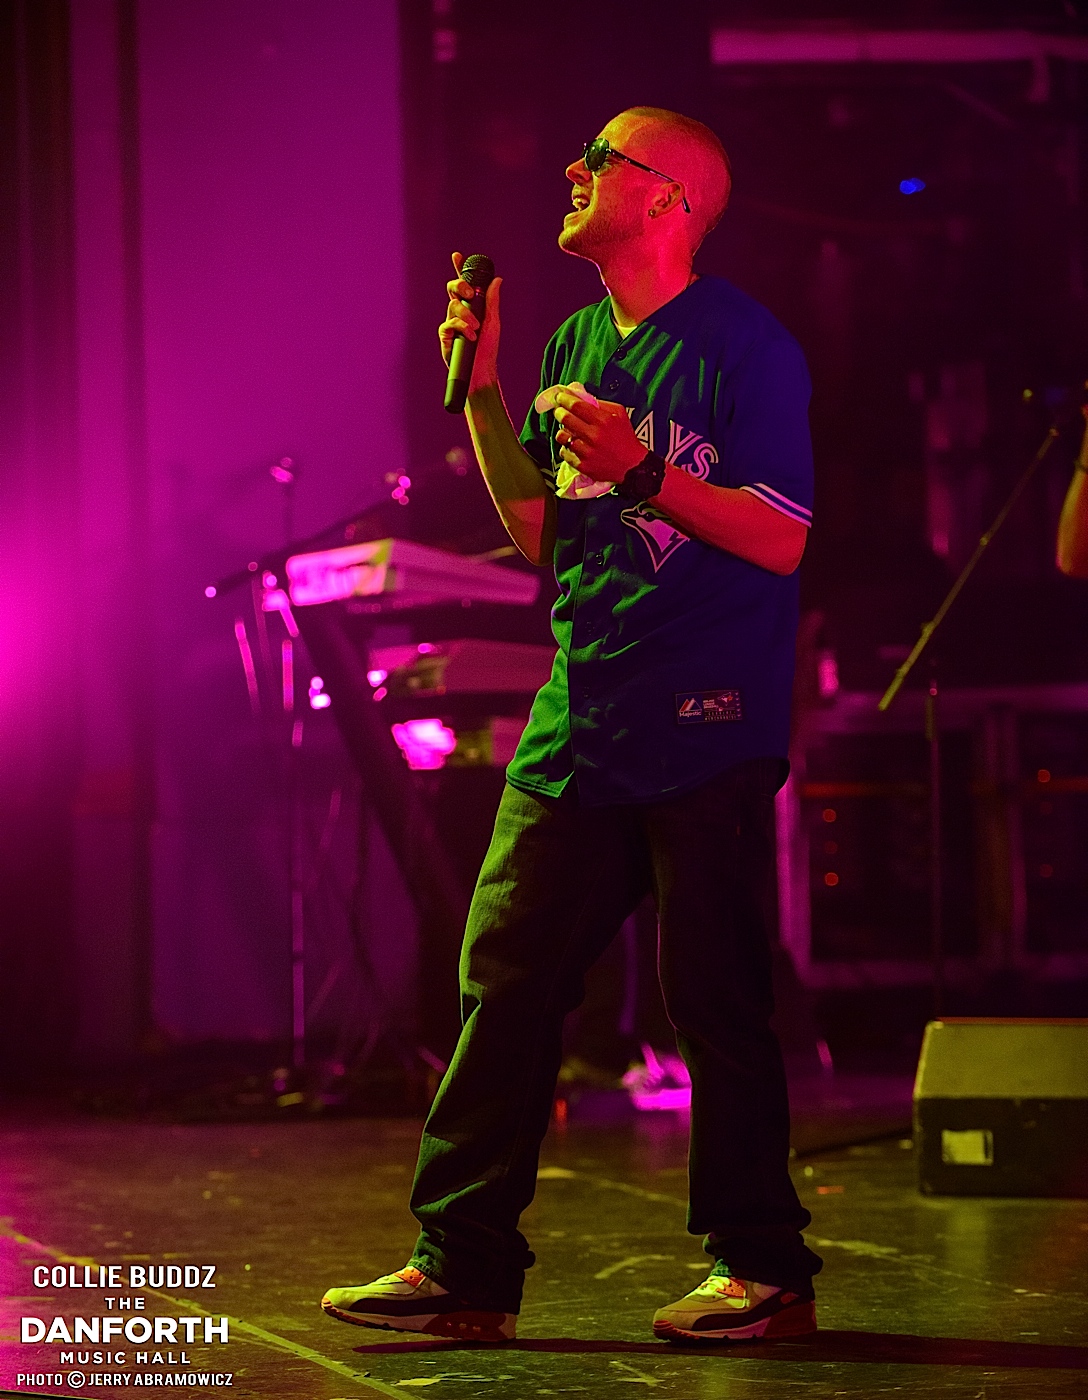 COLLIE BUDDZ performs at The Danforth Music Hall.